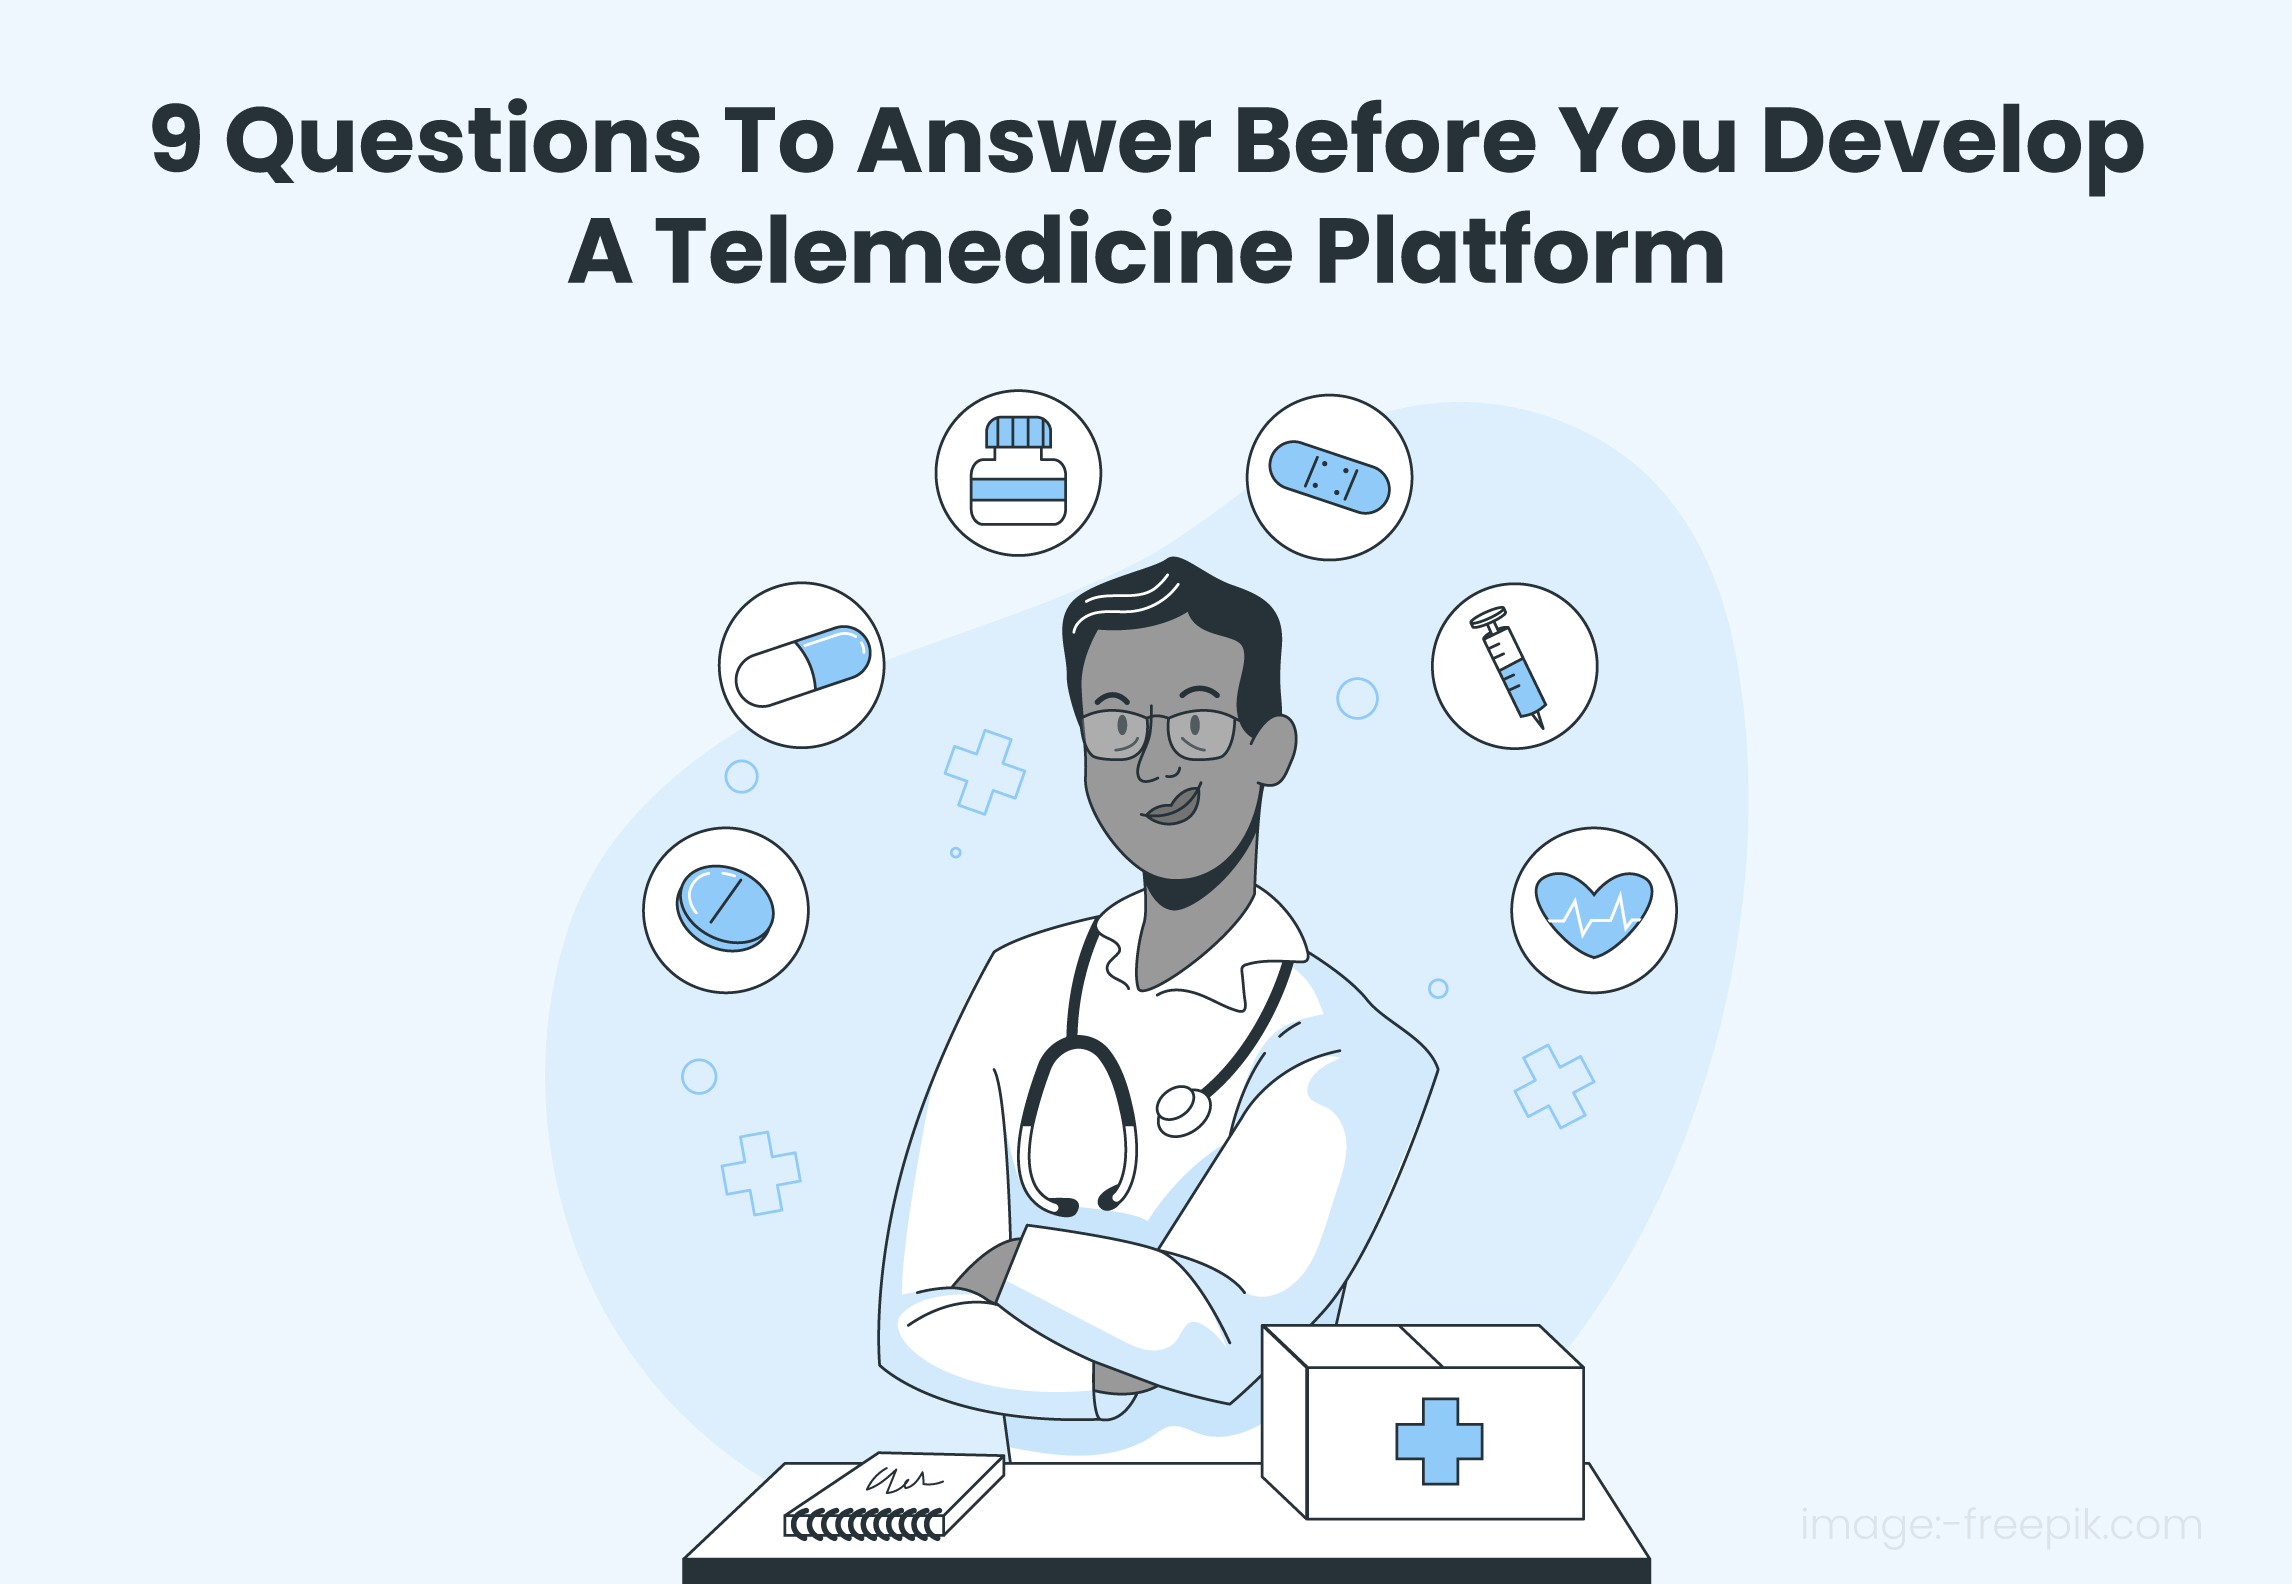 9 Essential Questions to Consider When Developing a Telemedicine Platform